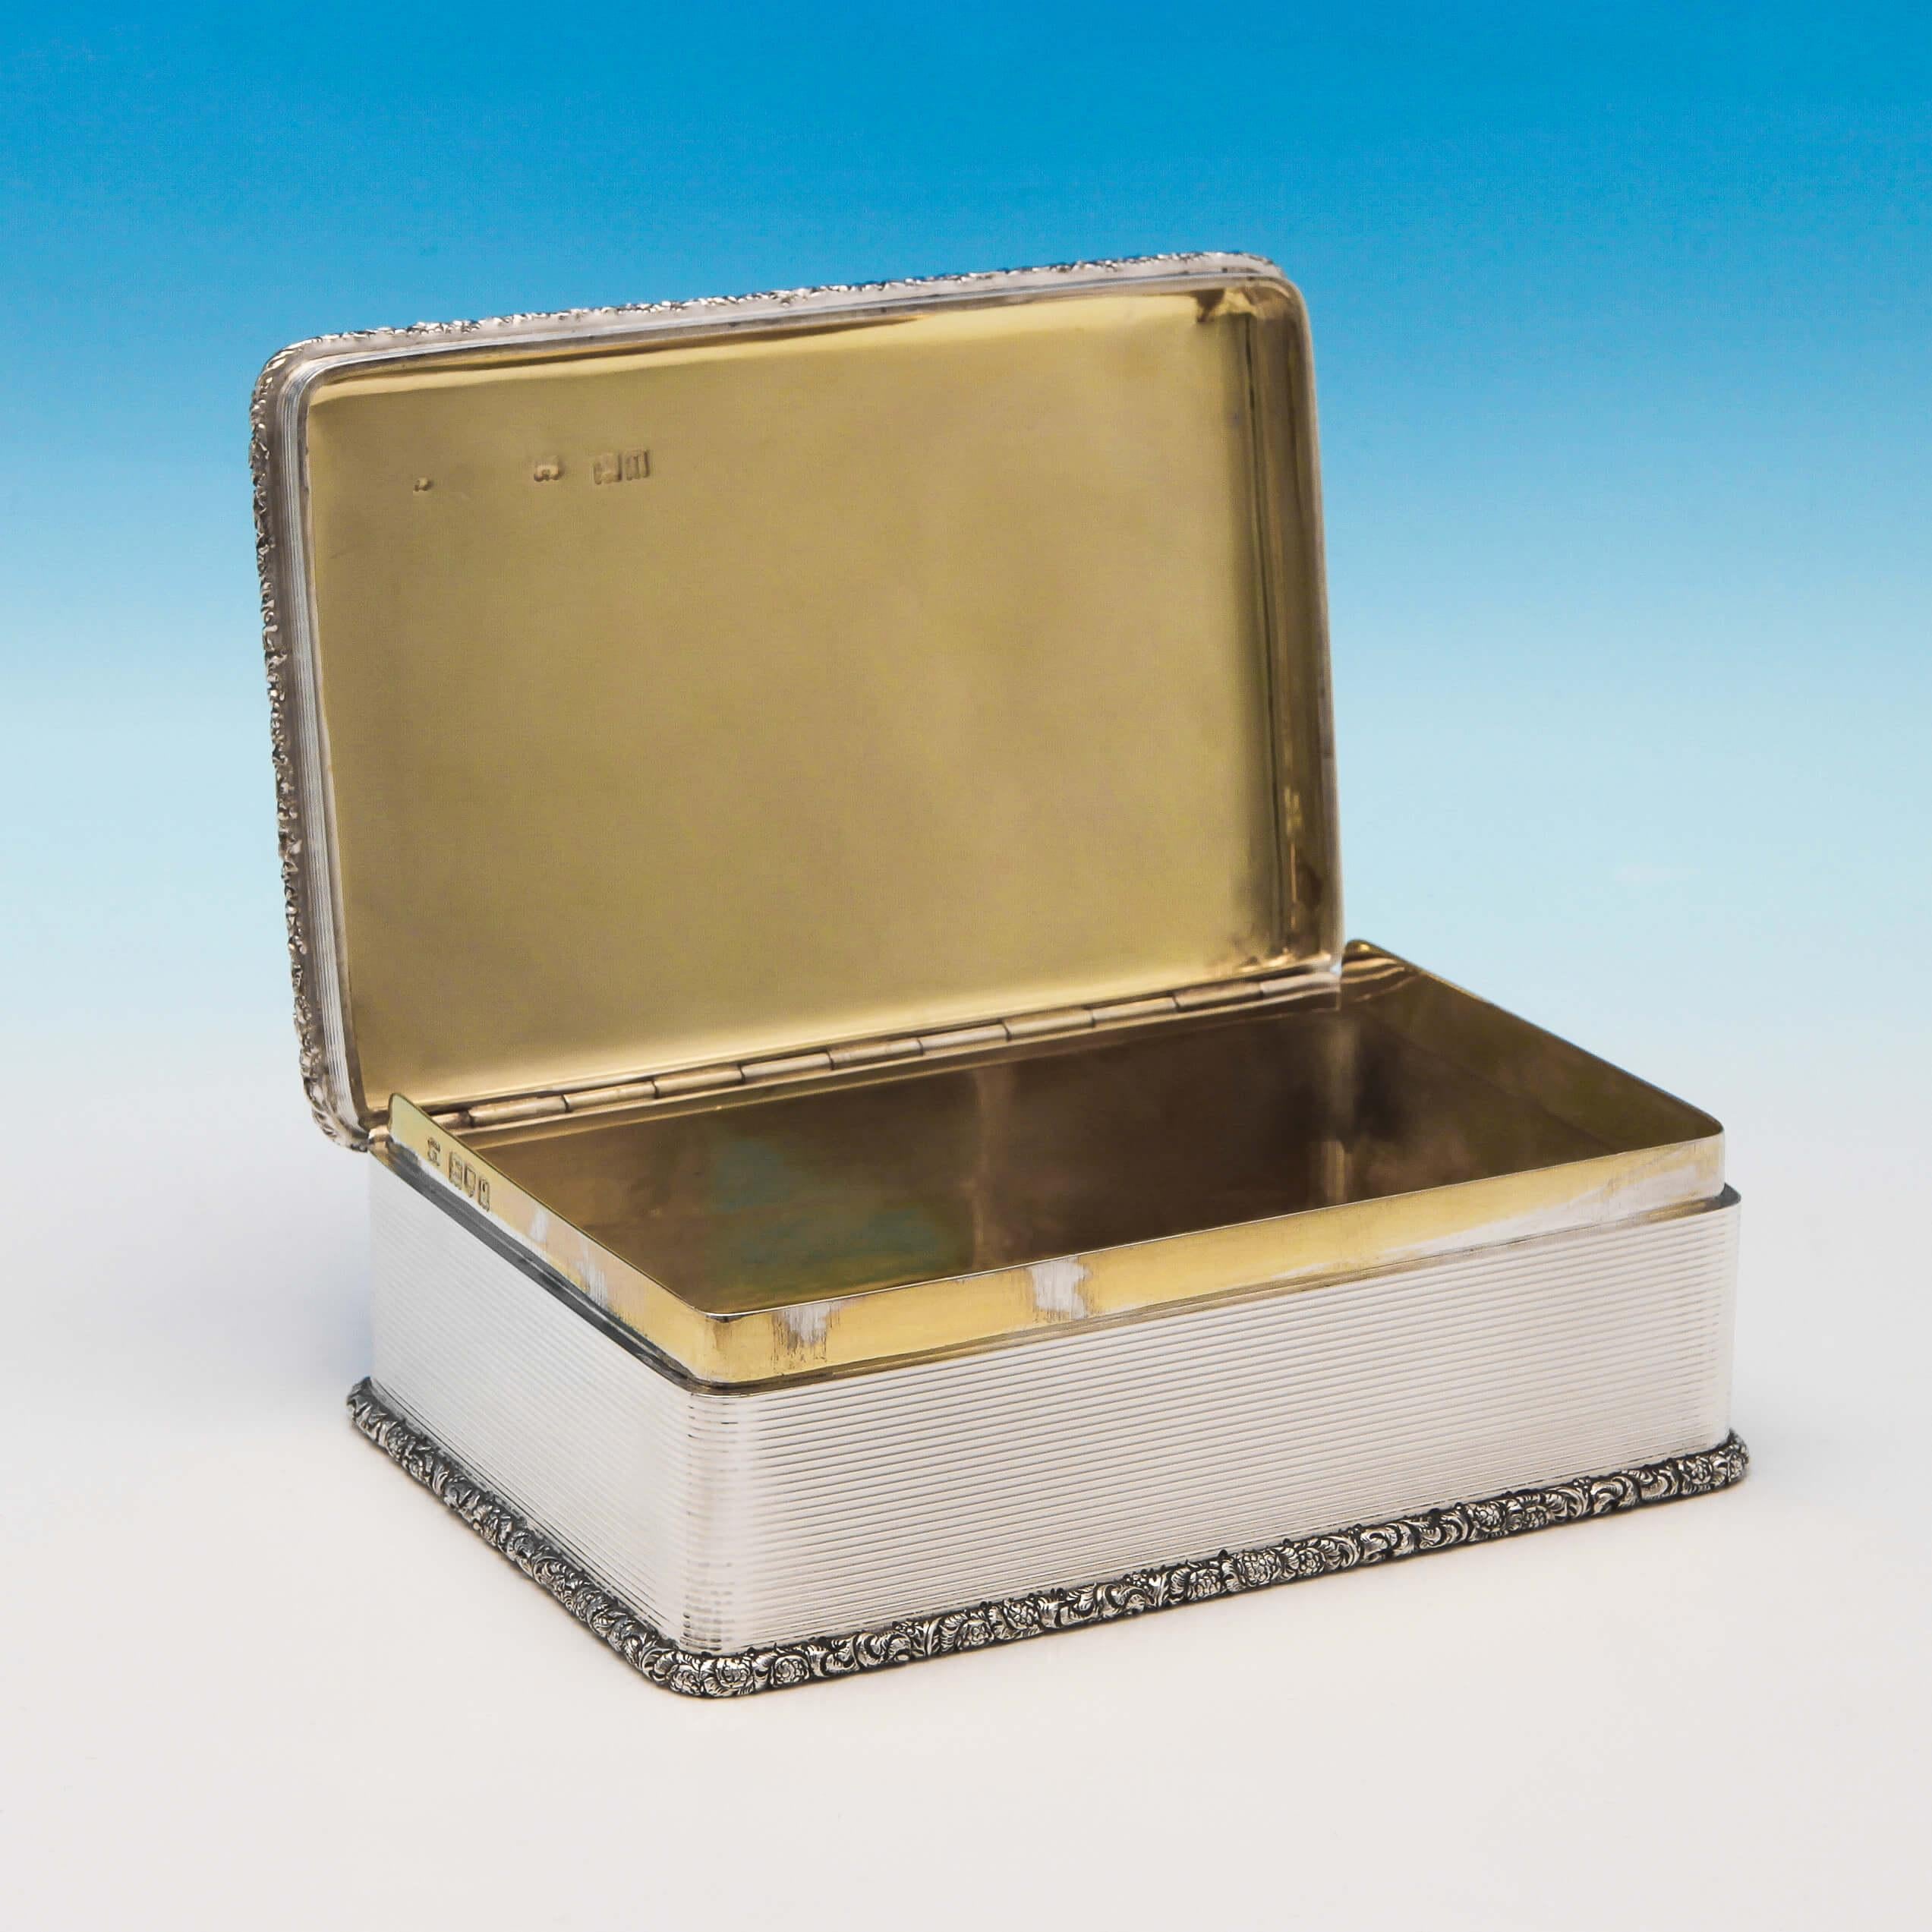 Hallmarked in London in 1911 by D. & J. Wellby, this exceptional, Antique, sterling silver table snuff box, is rectangular in shape, and features a cast border, gilt interior, and engine turned decoration. The snuff box measures 2.25